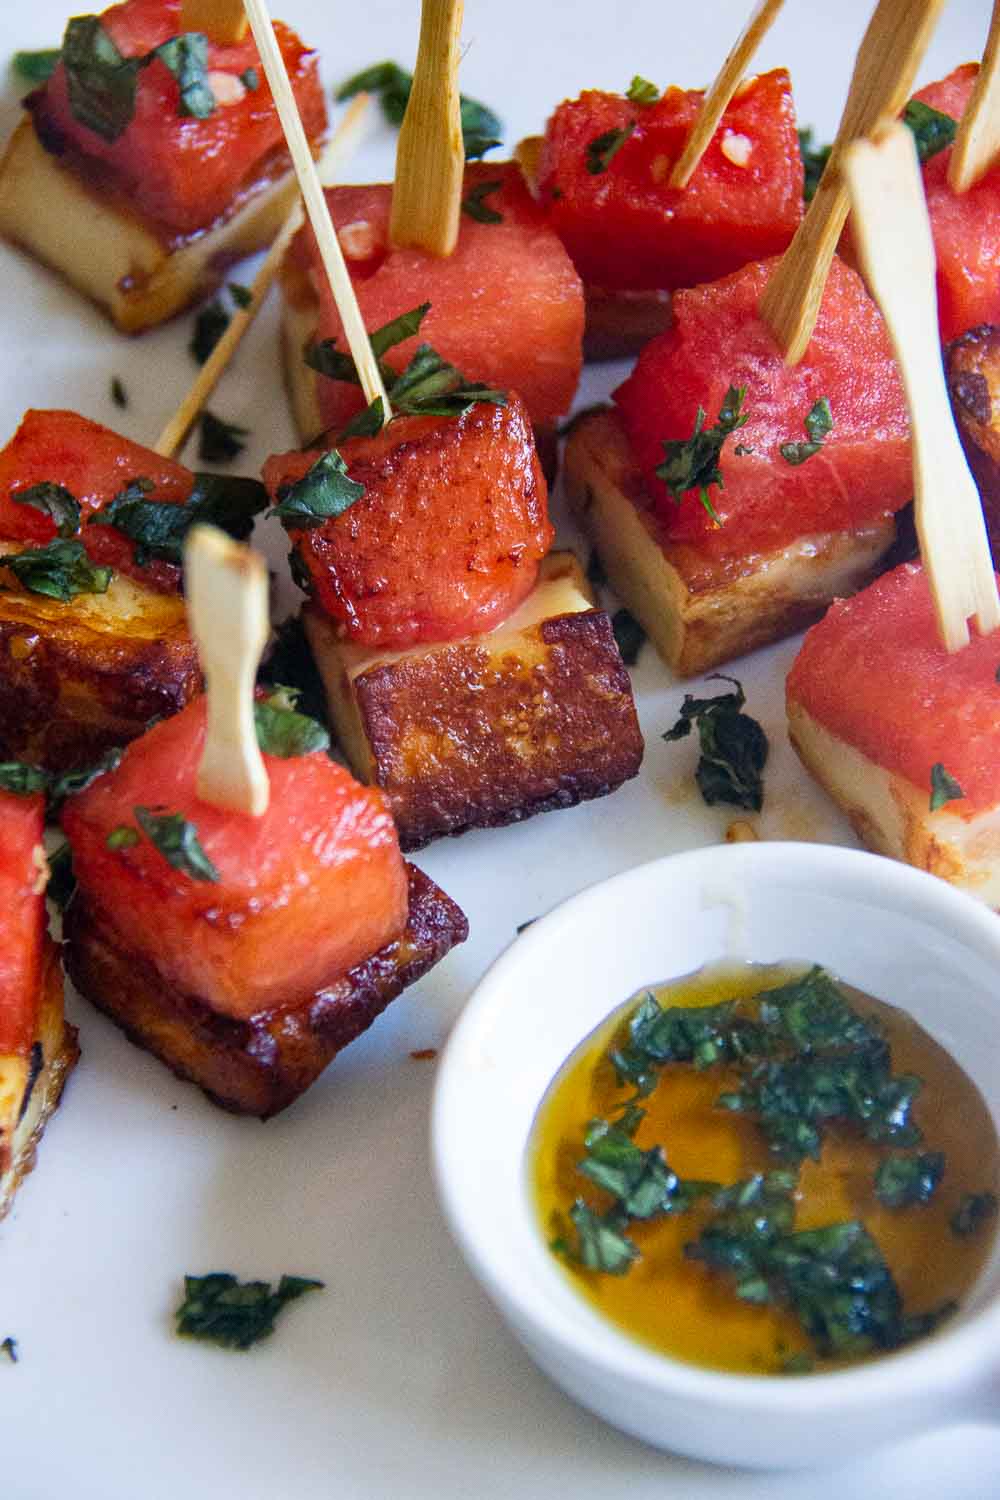 These watermelon cheese skewers are a fun, light, healthy summer appetizer. The flavor combinations make a salty, sweet flavor and are great for BBQs, picnics, or a quick snack.